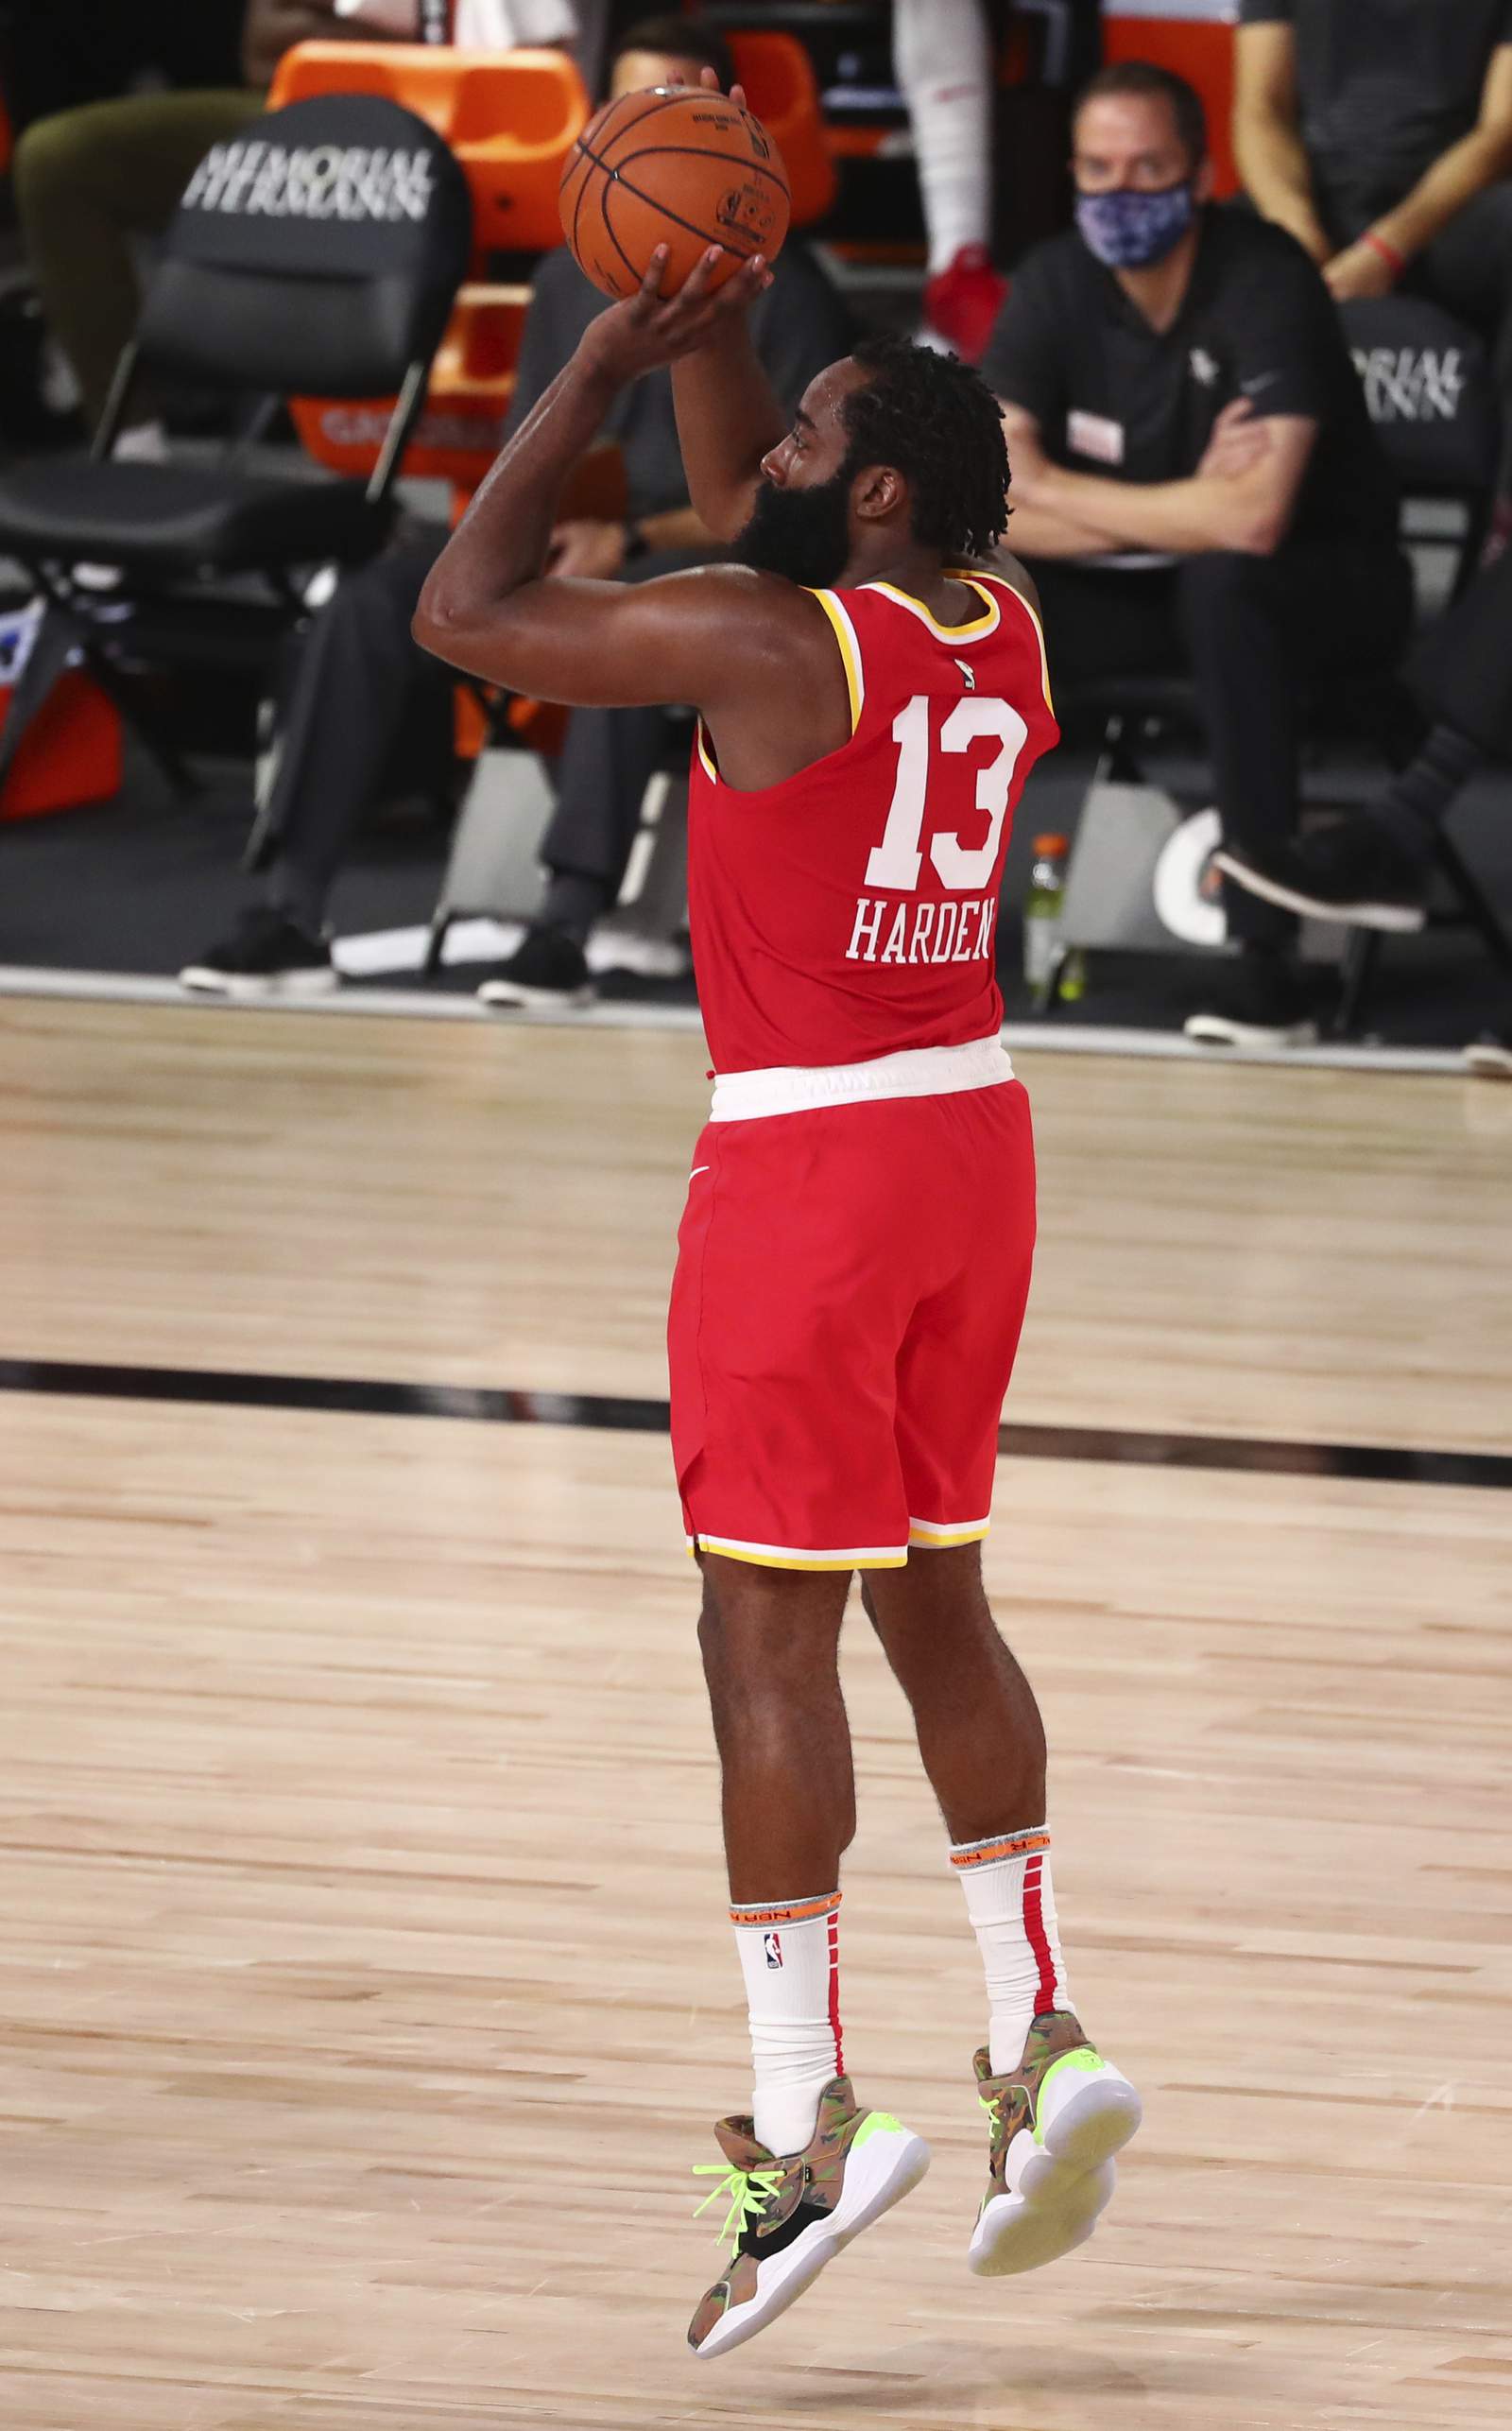 Turner helps Indiana hold off Harden rally to beat Rockets